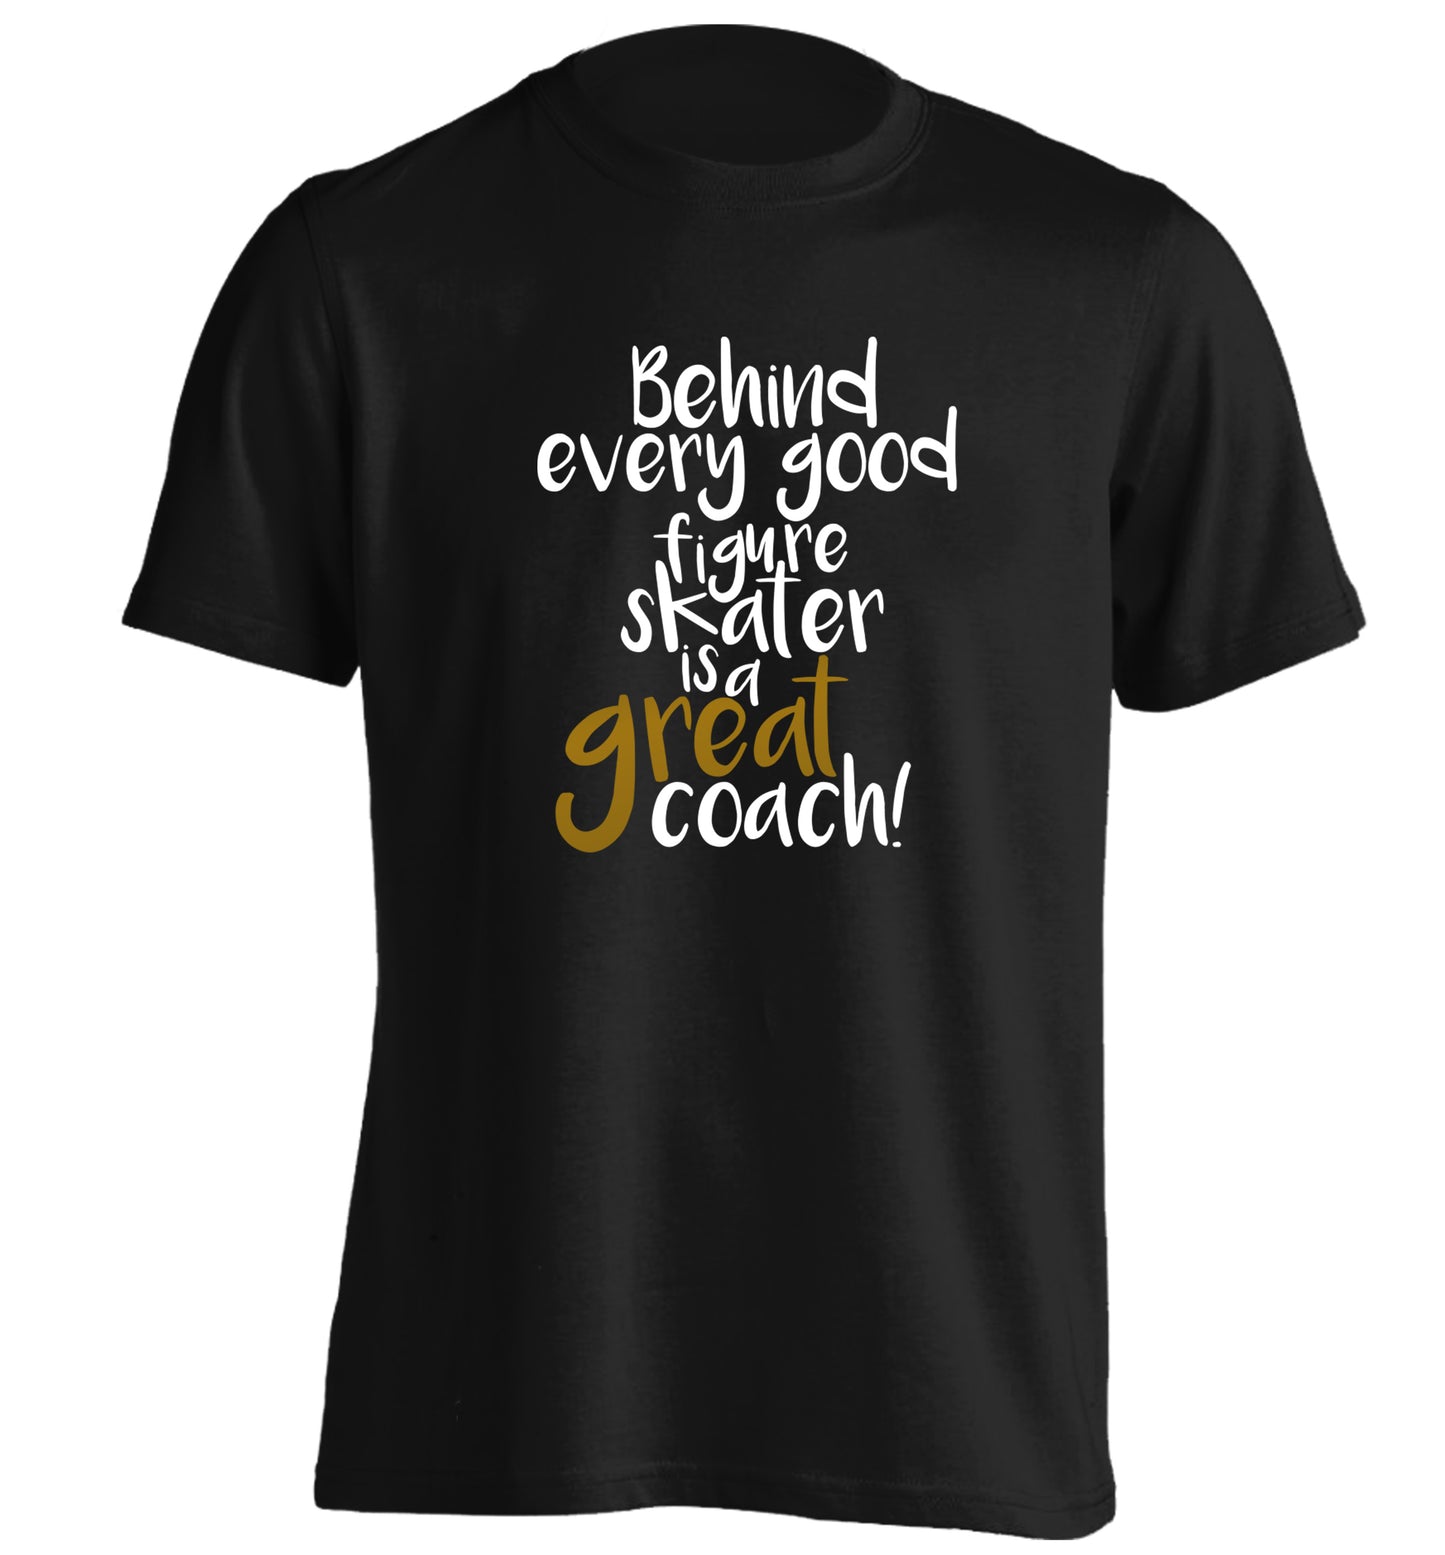 Behind every good figure skater is a great coach adults unisexblack Tshirt 2XL